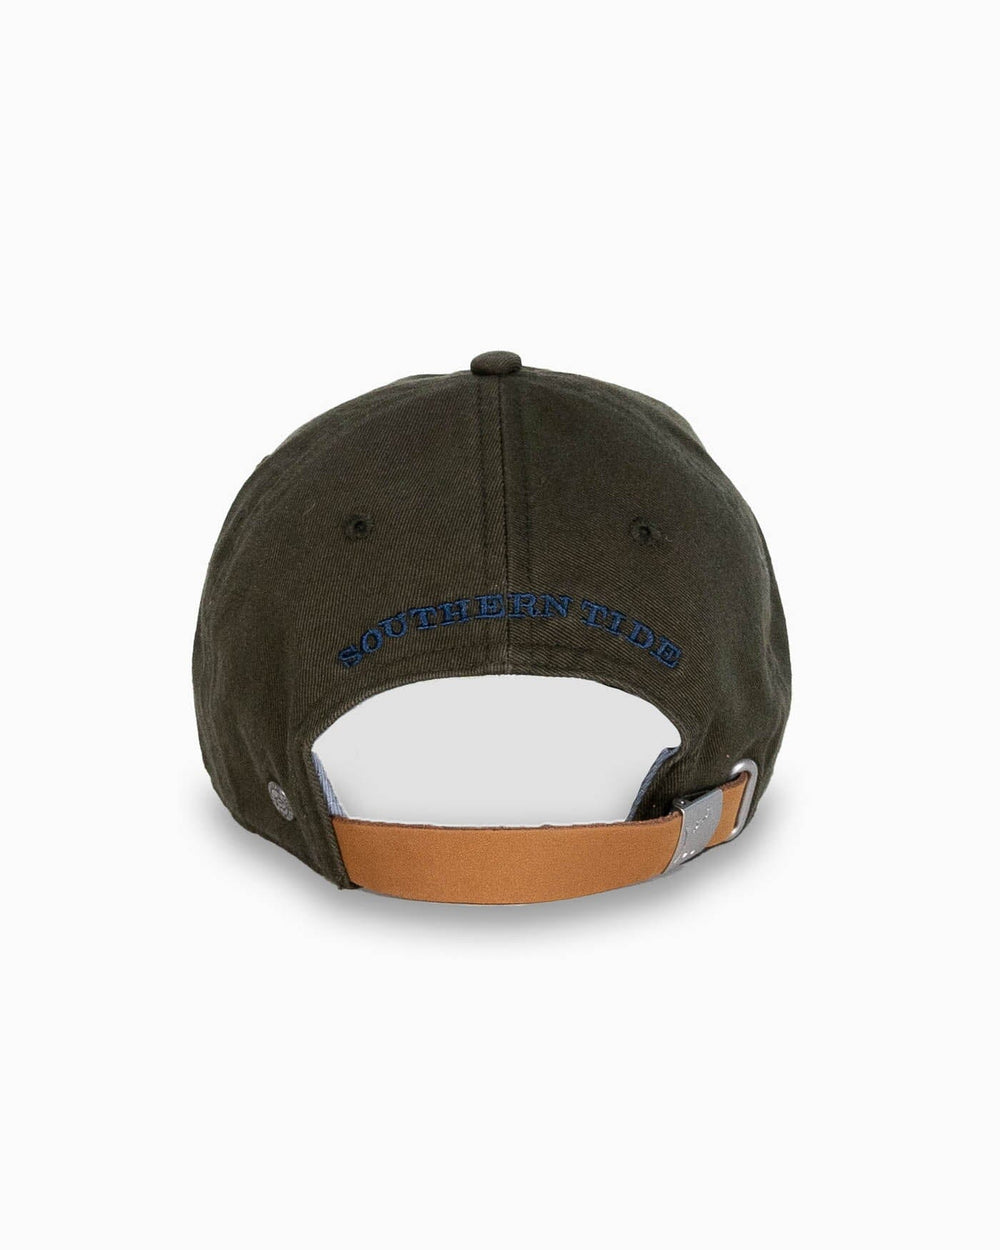 The back view of the Southern Tide mini-skipjack-leather-strap-hat-3 by Southern Tide - Forest